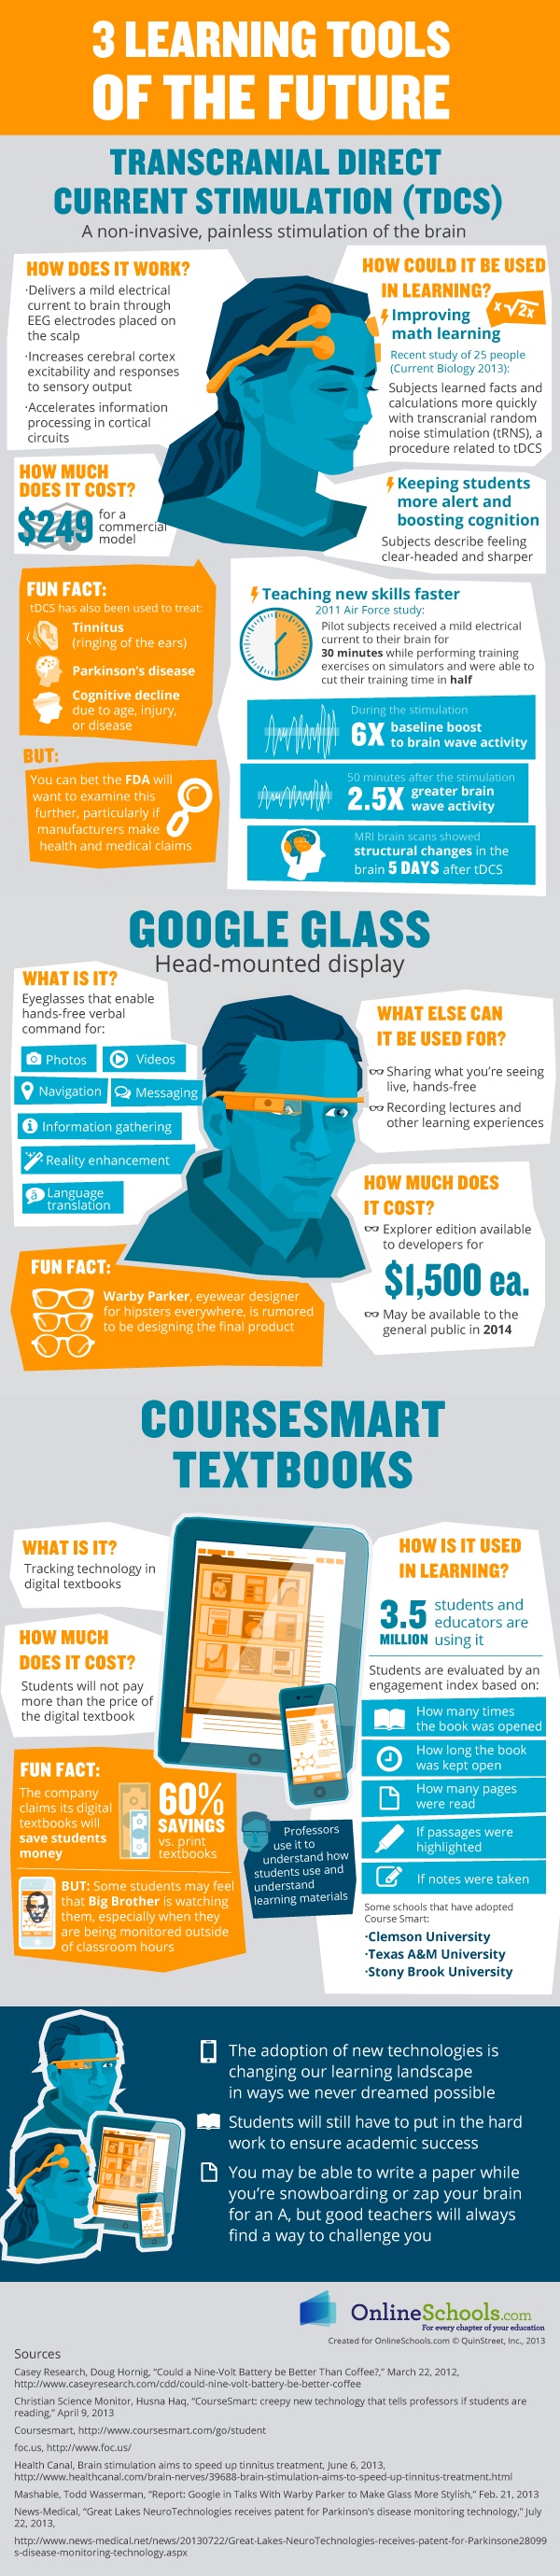 Future Learning Tools Infographic